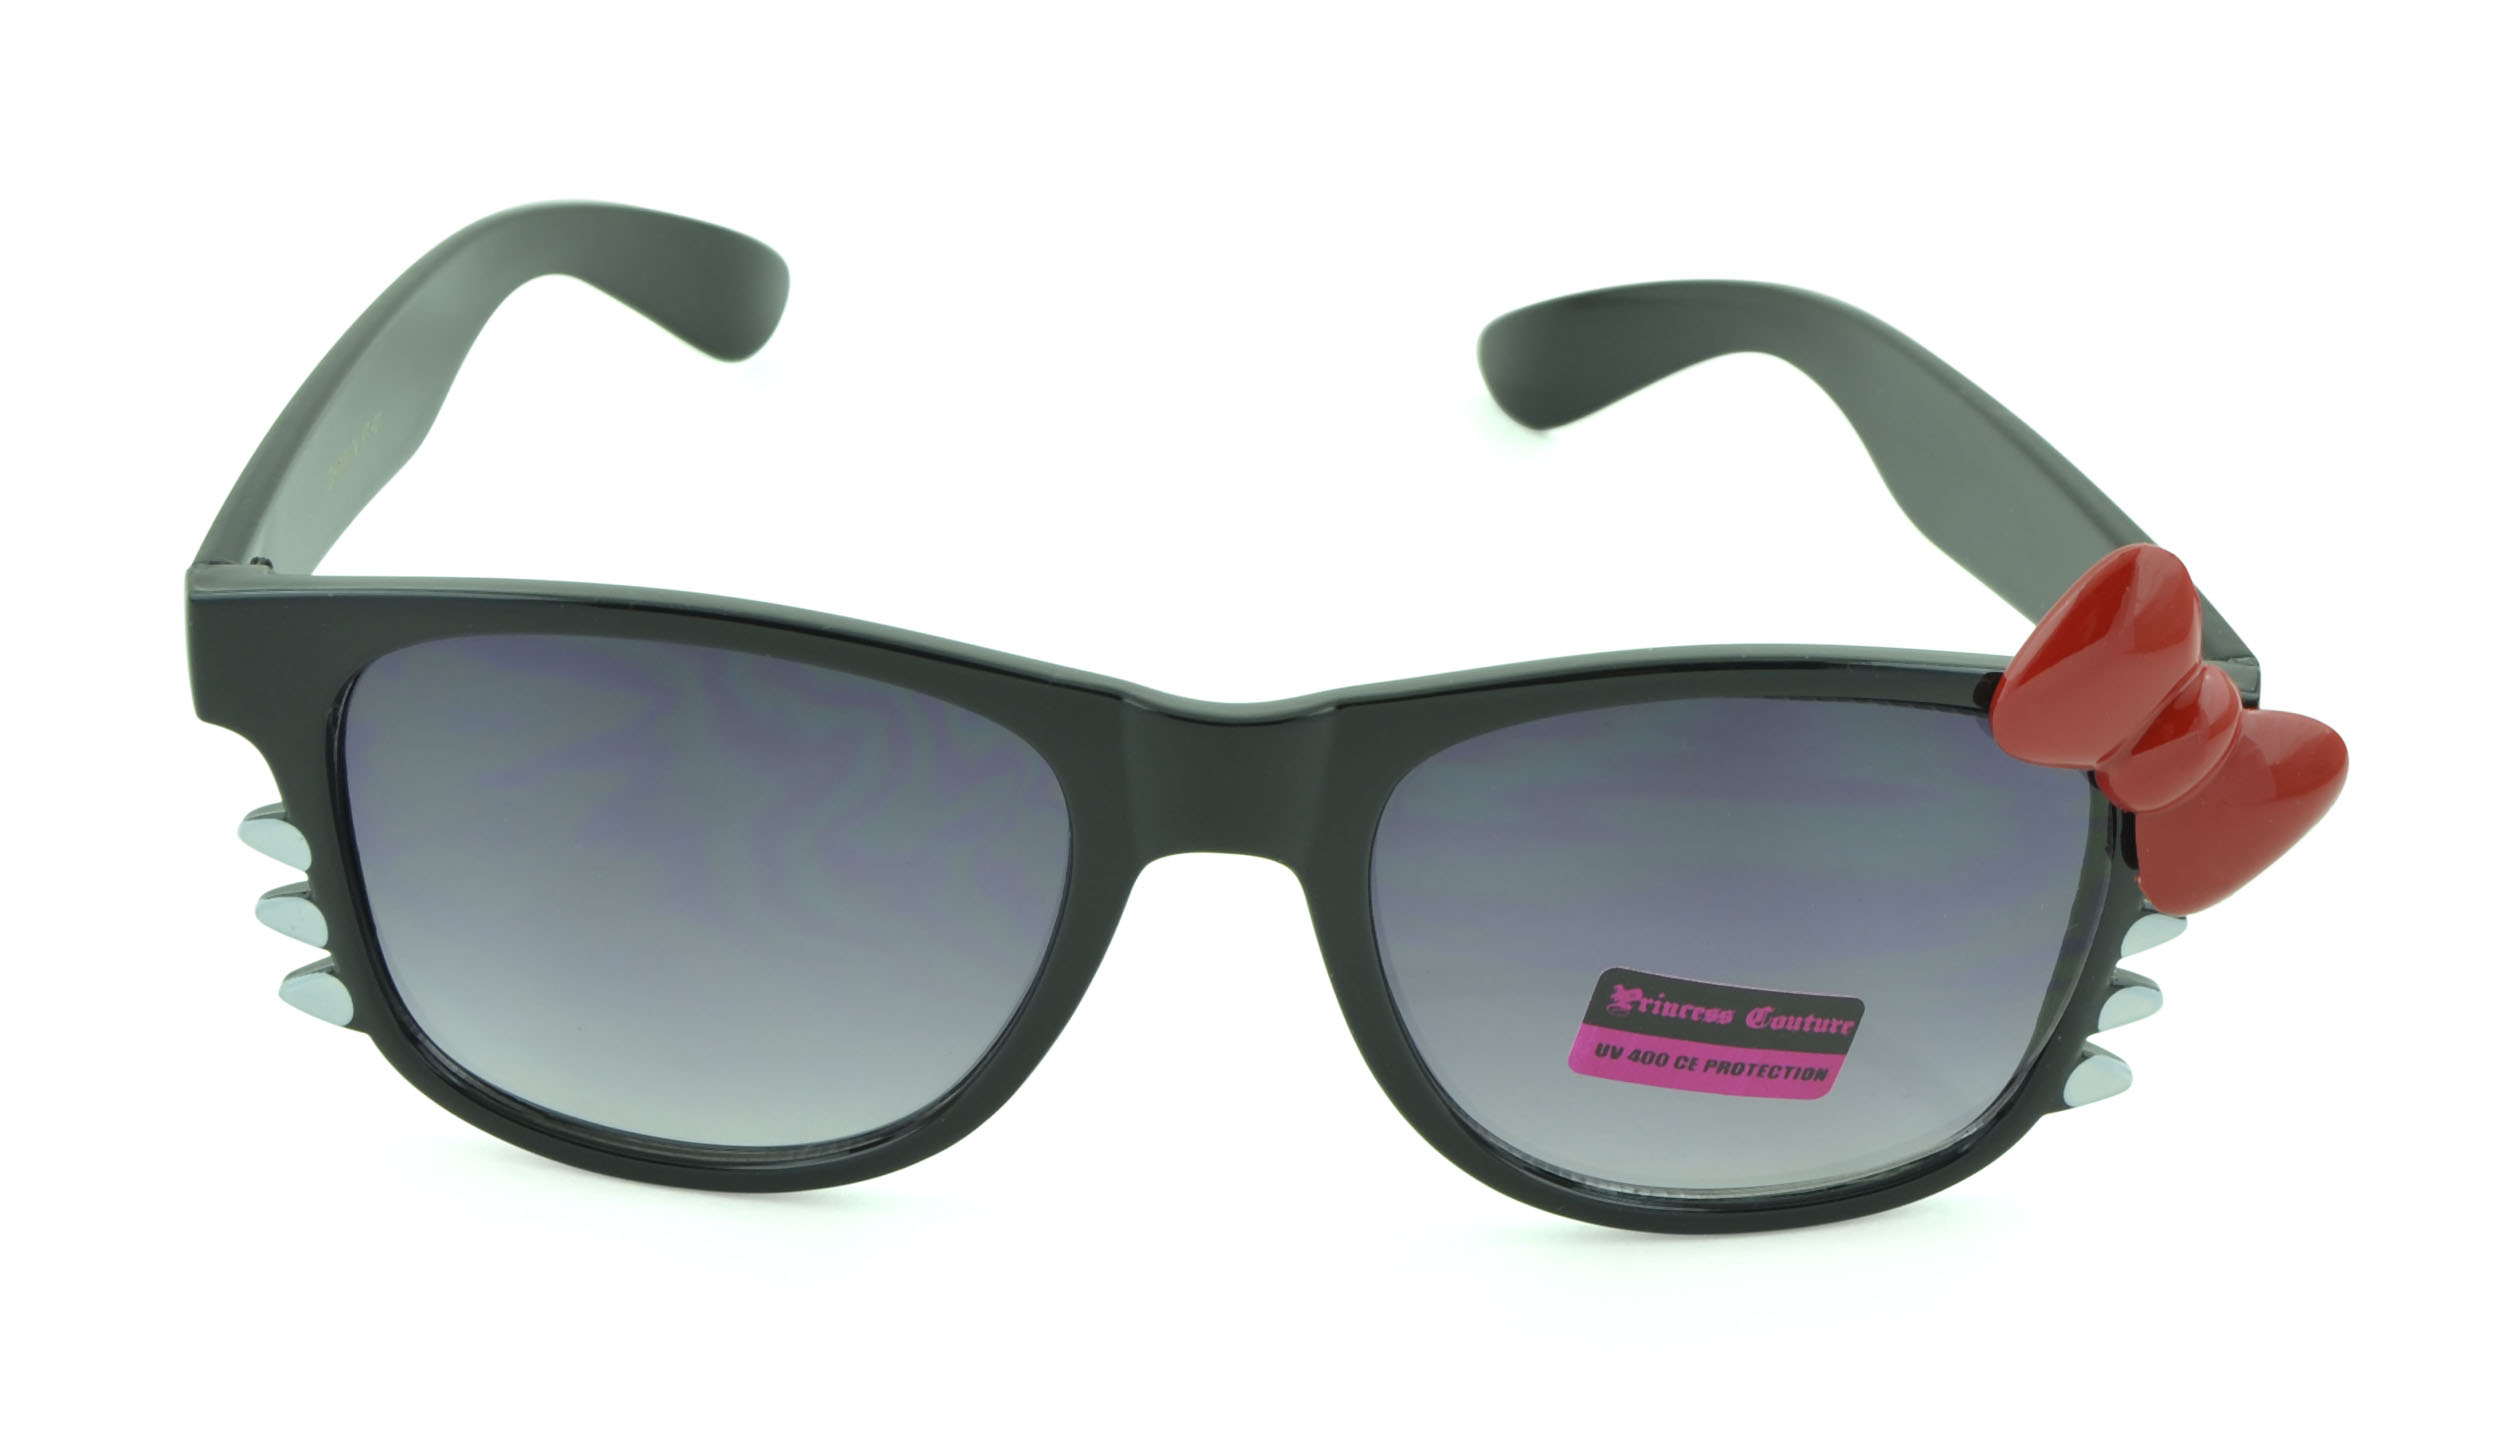 Belle Donne-Women's Kitty Cat Style Sunglasses | Whiskers and Bow Accent-Black2